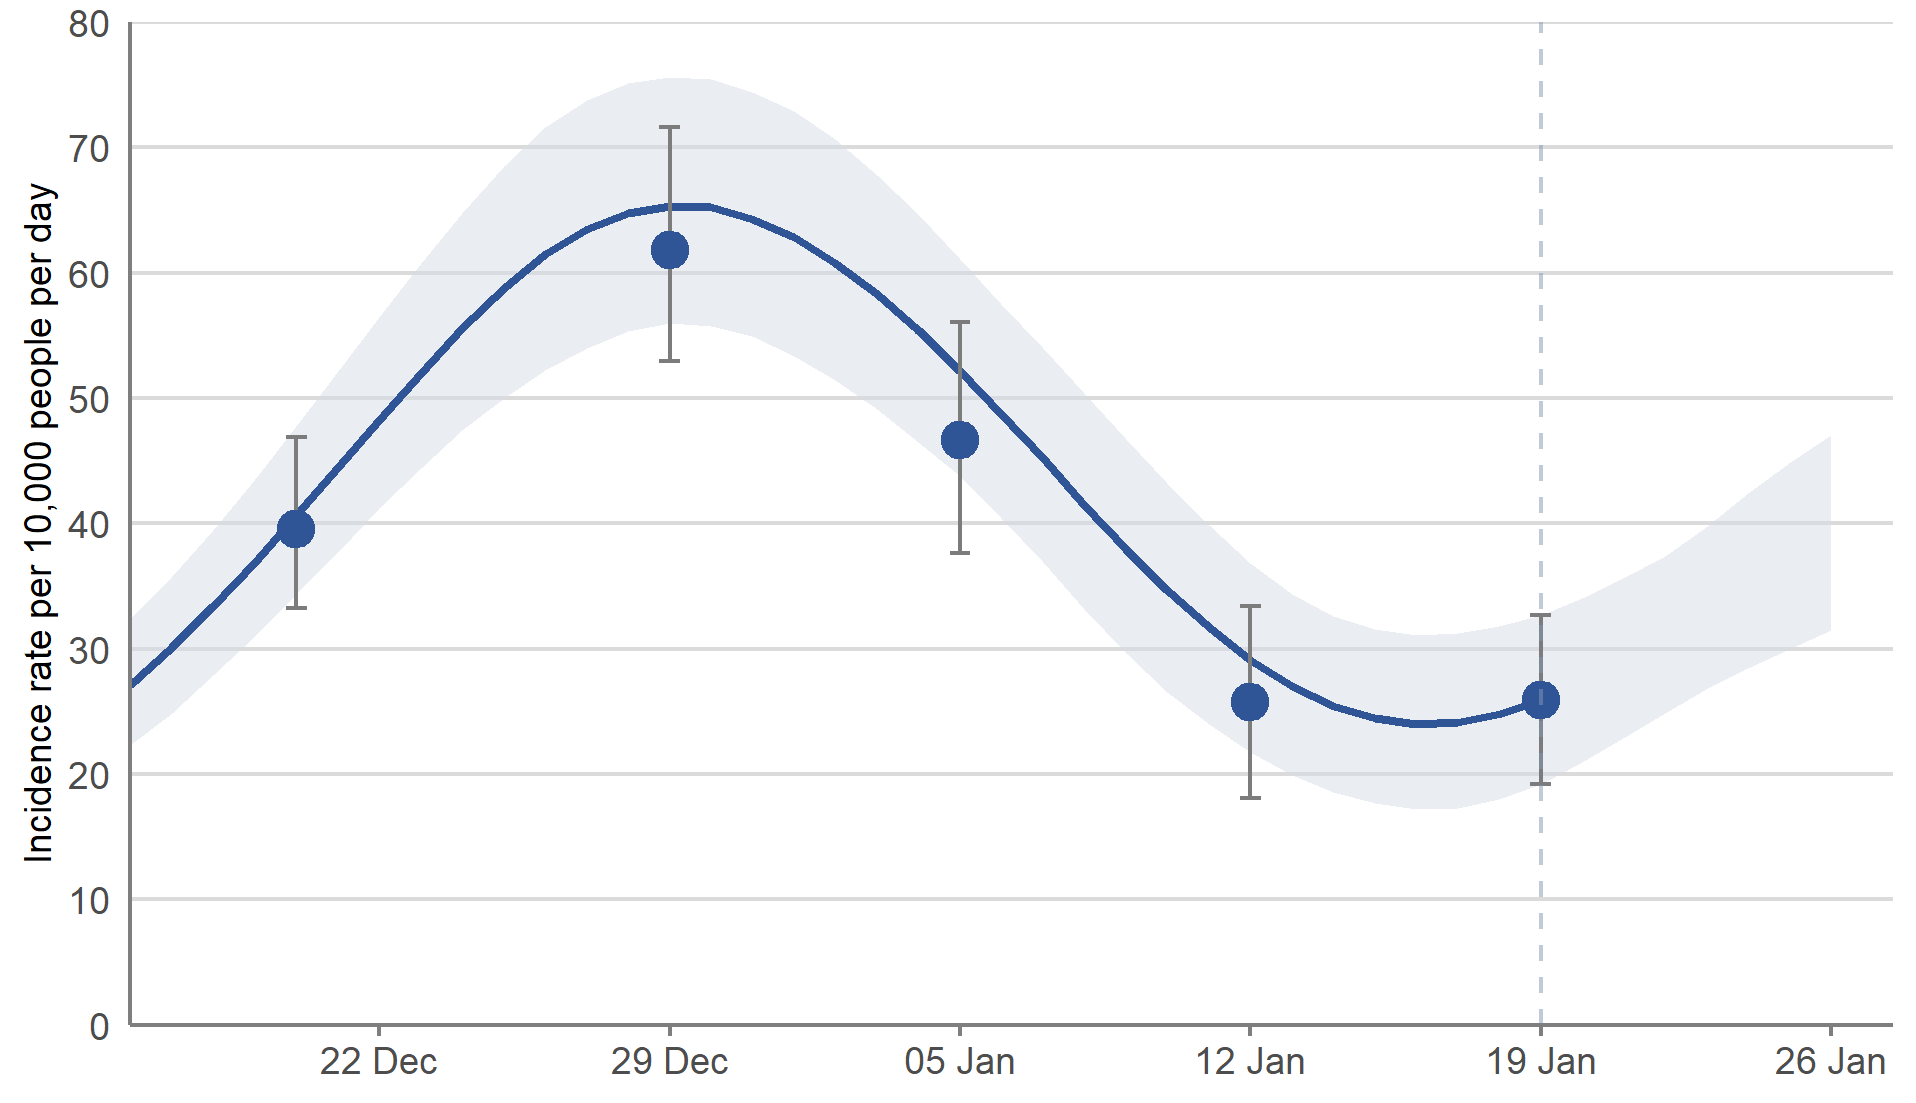 The daily estimates of the incidence of new PCR positive COVID-19 cases reached the highest peak since the start of the pandemic on 29 December 2021. The incidence rate then decreased until mid-January. In the most recent week, the percentage of people testing positive in Scotland has increased.